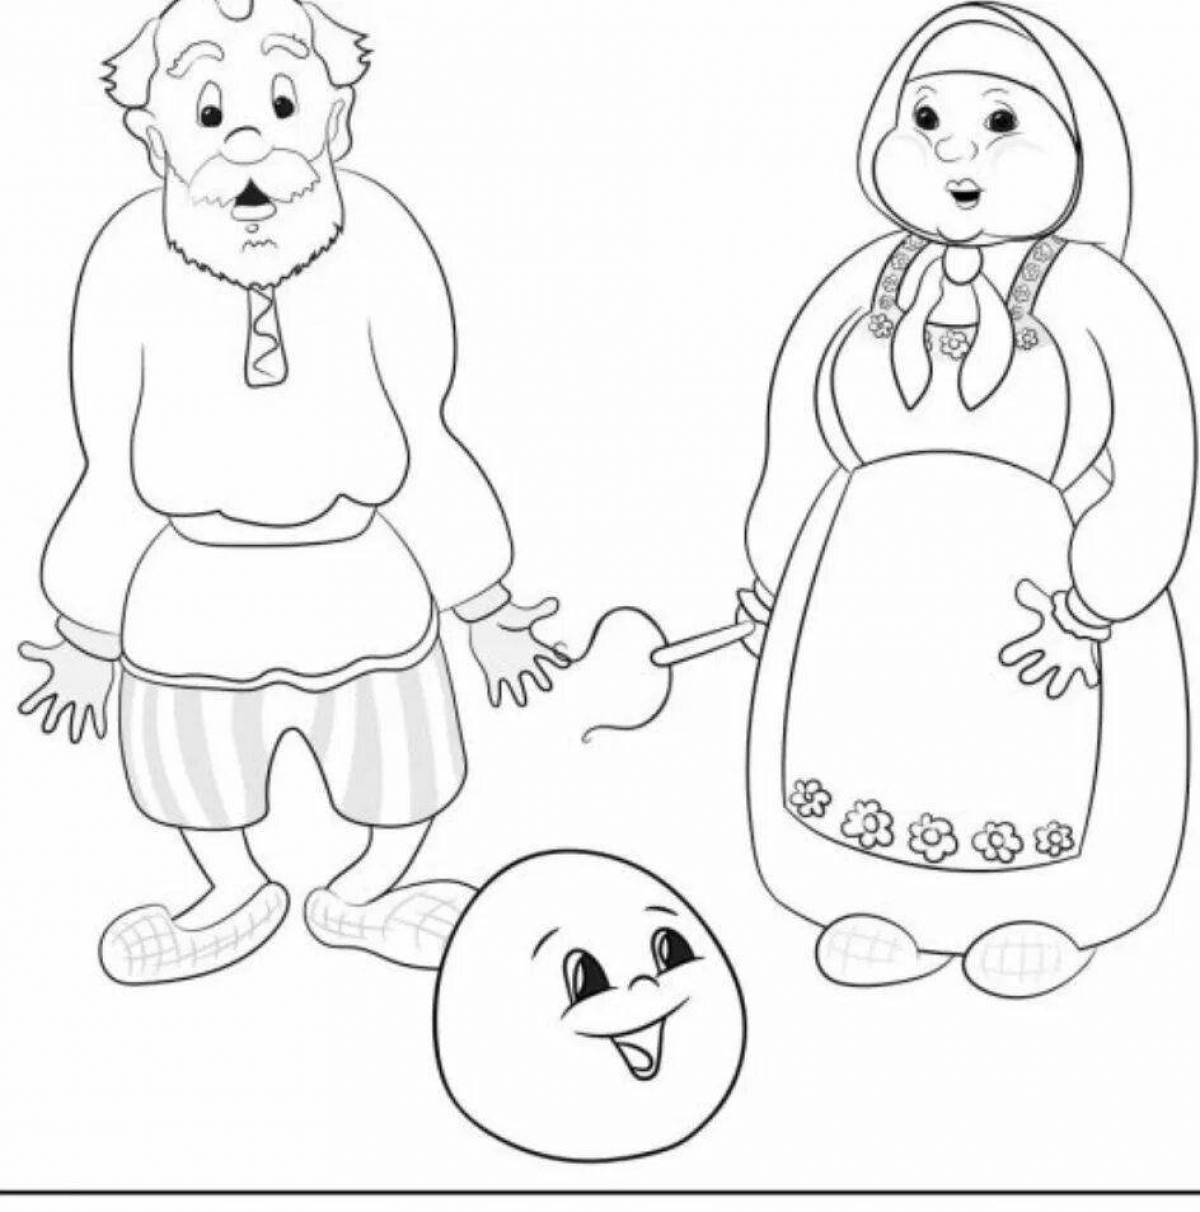 Coloring page charming gingerbread man for children